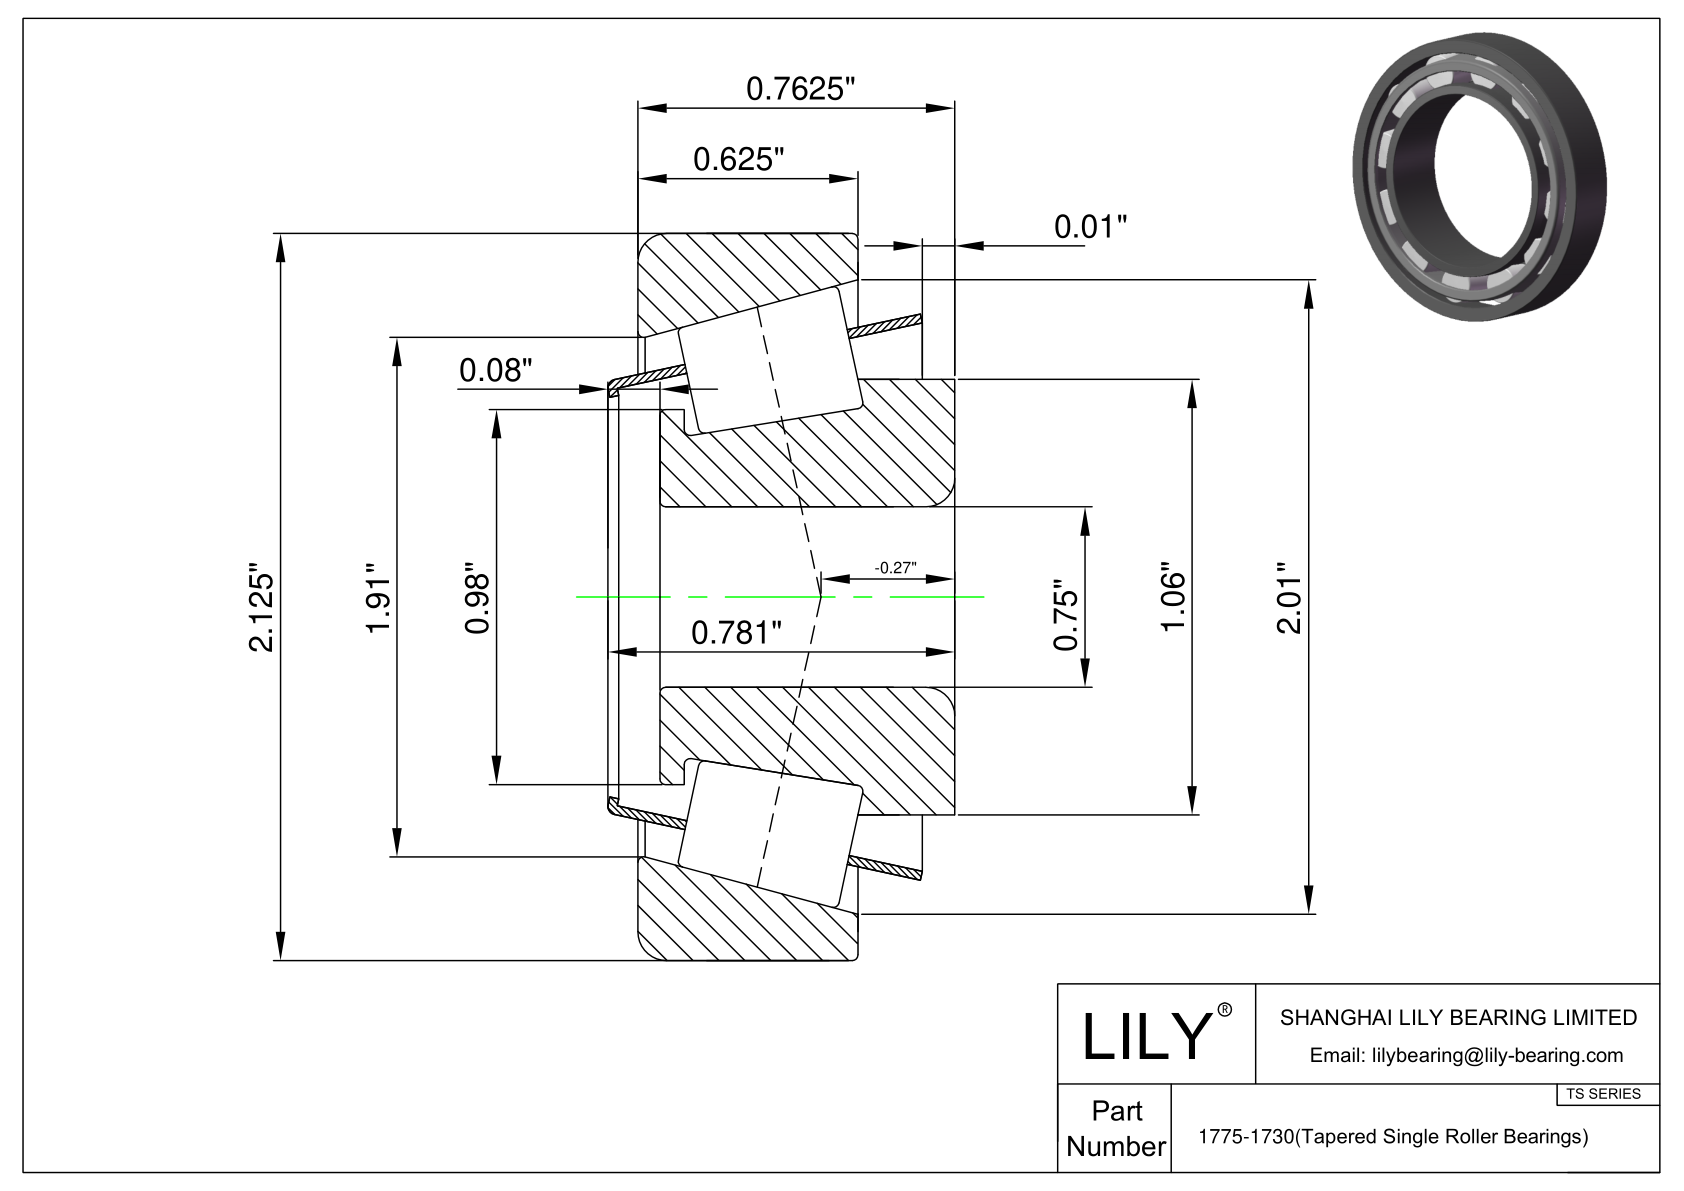 1775-1730 TS (Tapered Single Roller Bearings) (Imperial) cad drawing